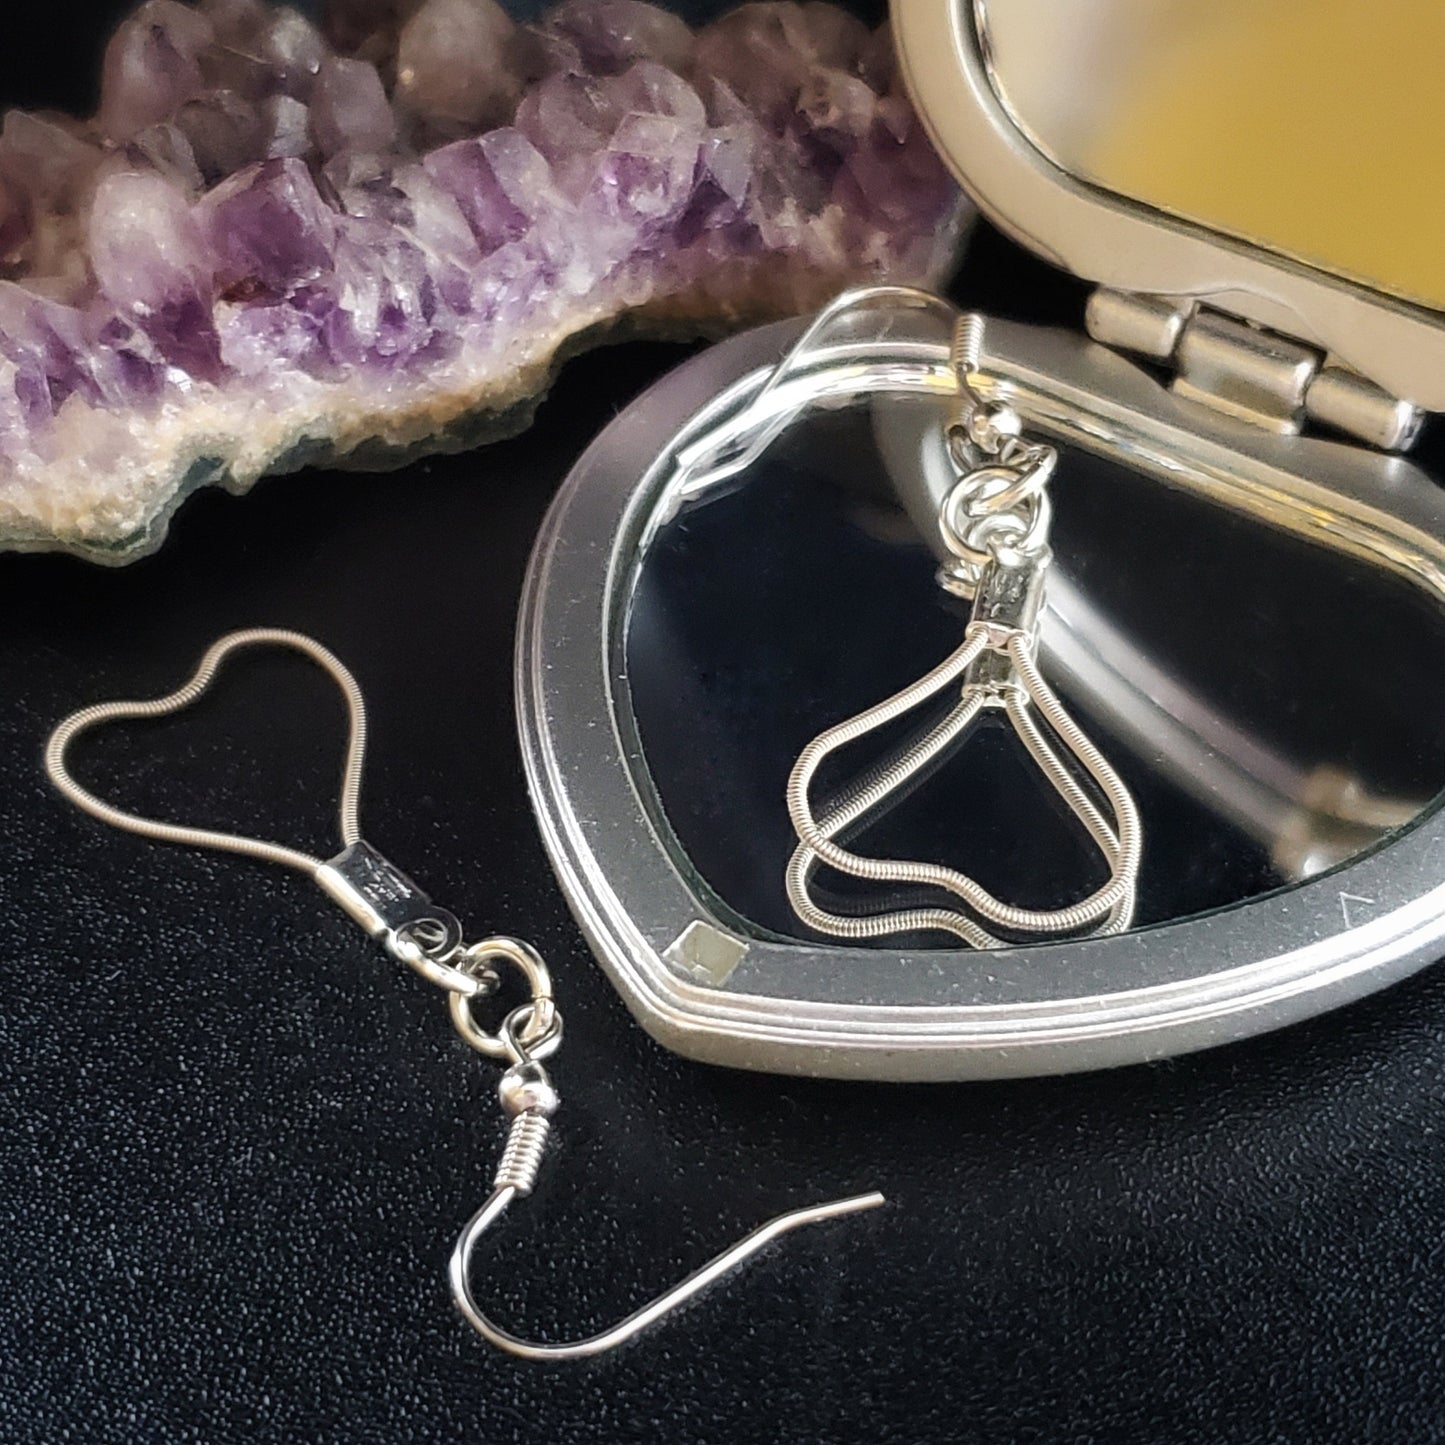 pair of heart shaped earrings made from upcycled guitar strings on a silver coloured heart shaped mirror next to a piece of amethyst